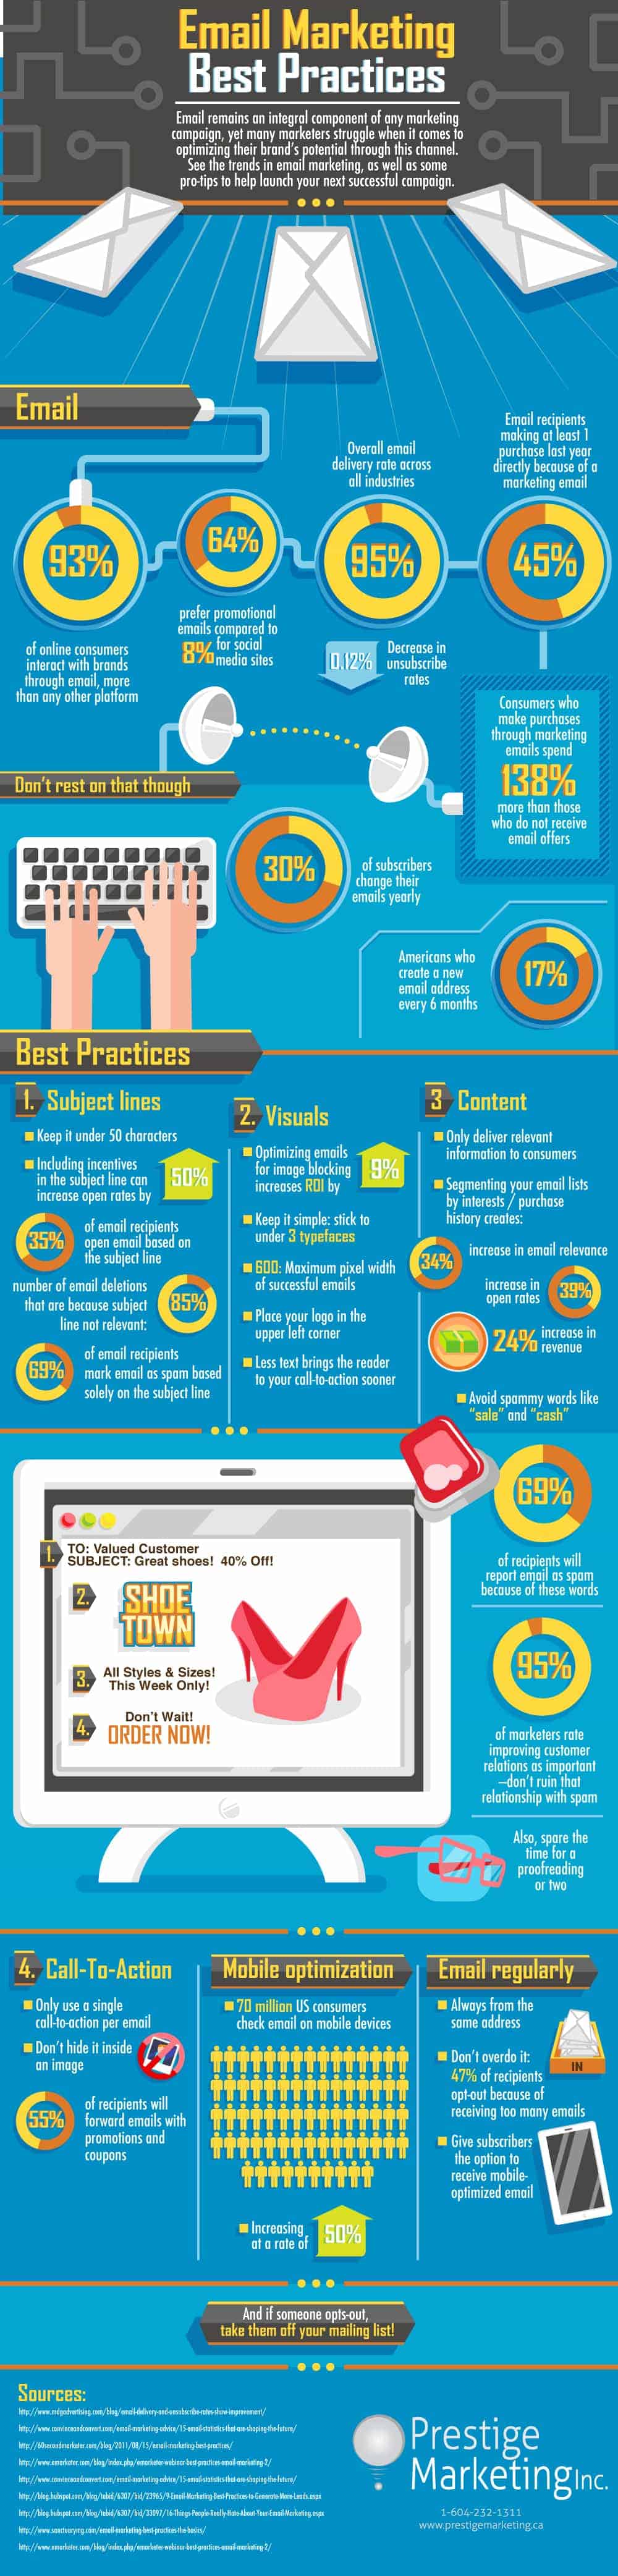 Email Marketing Best Practices 